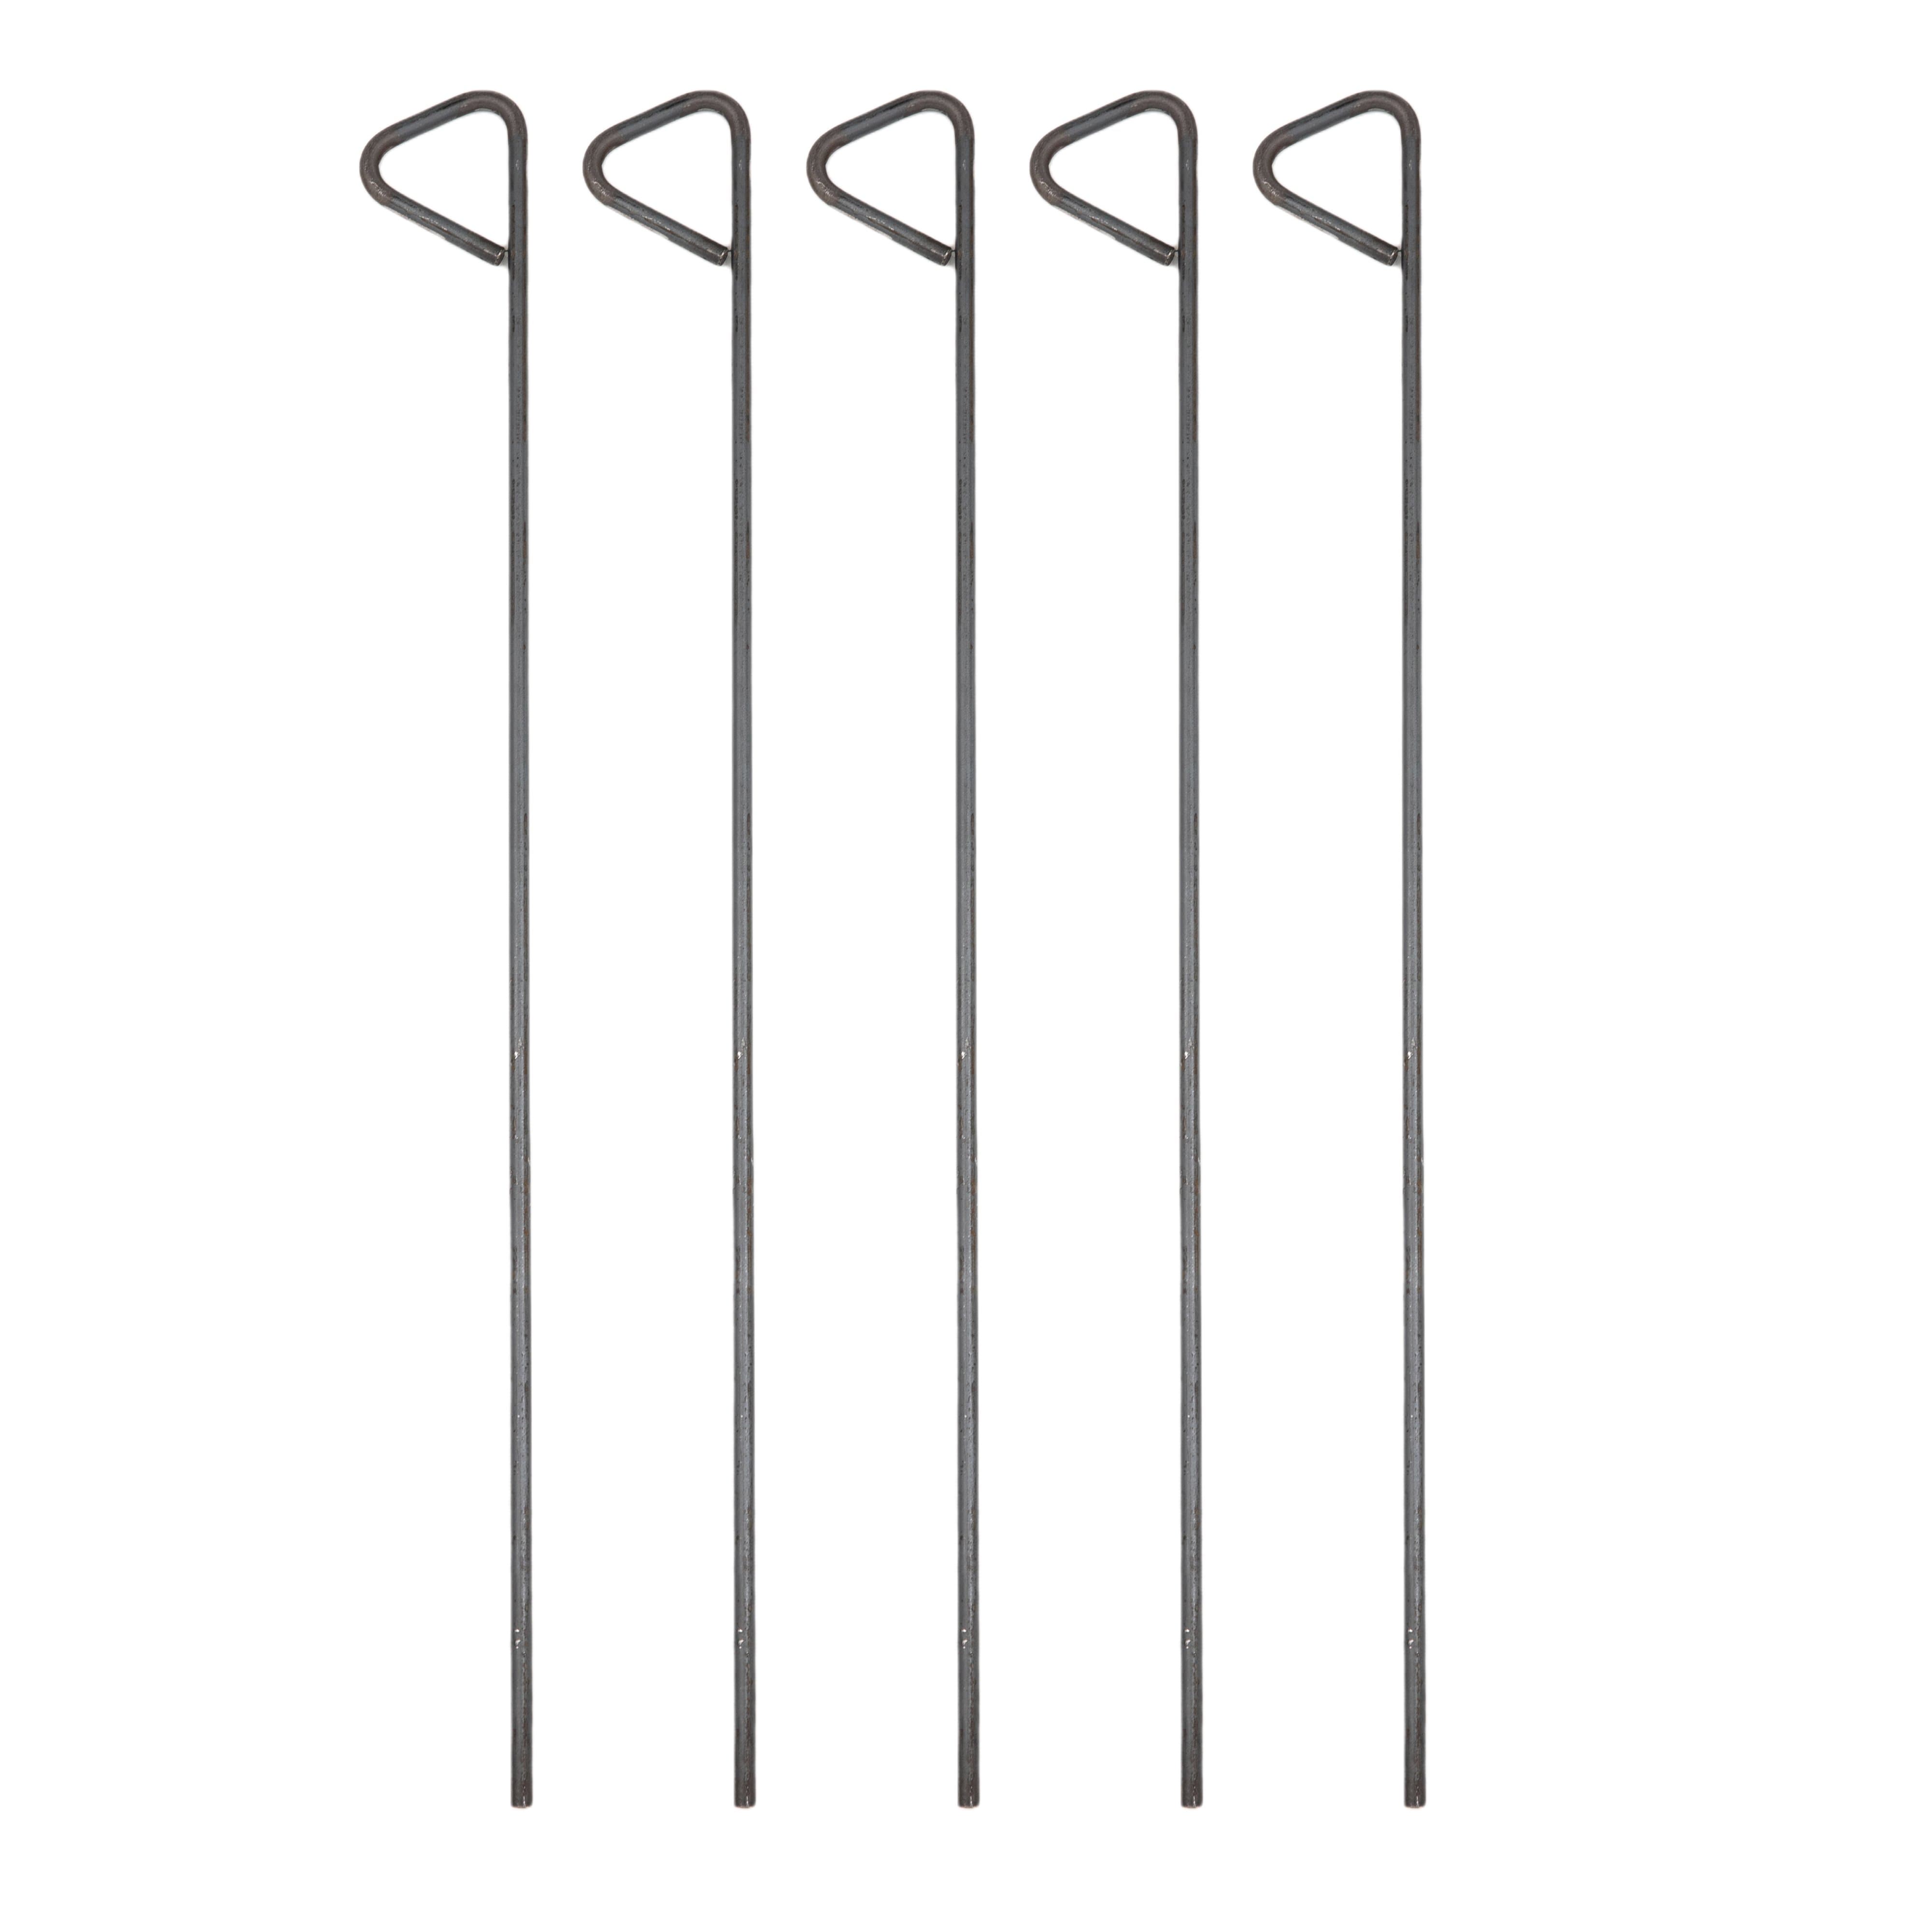 5 Anchor Stakes